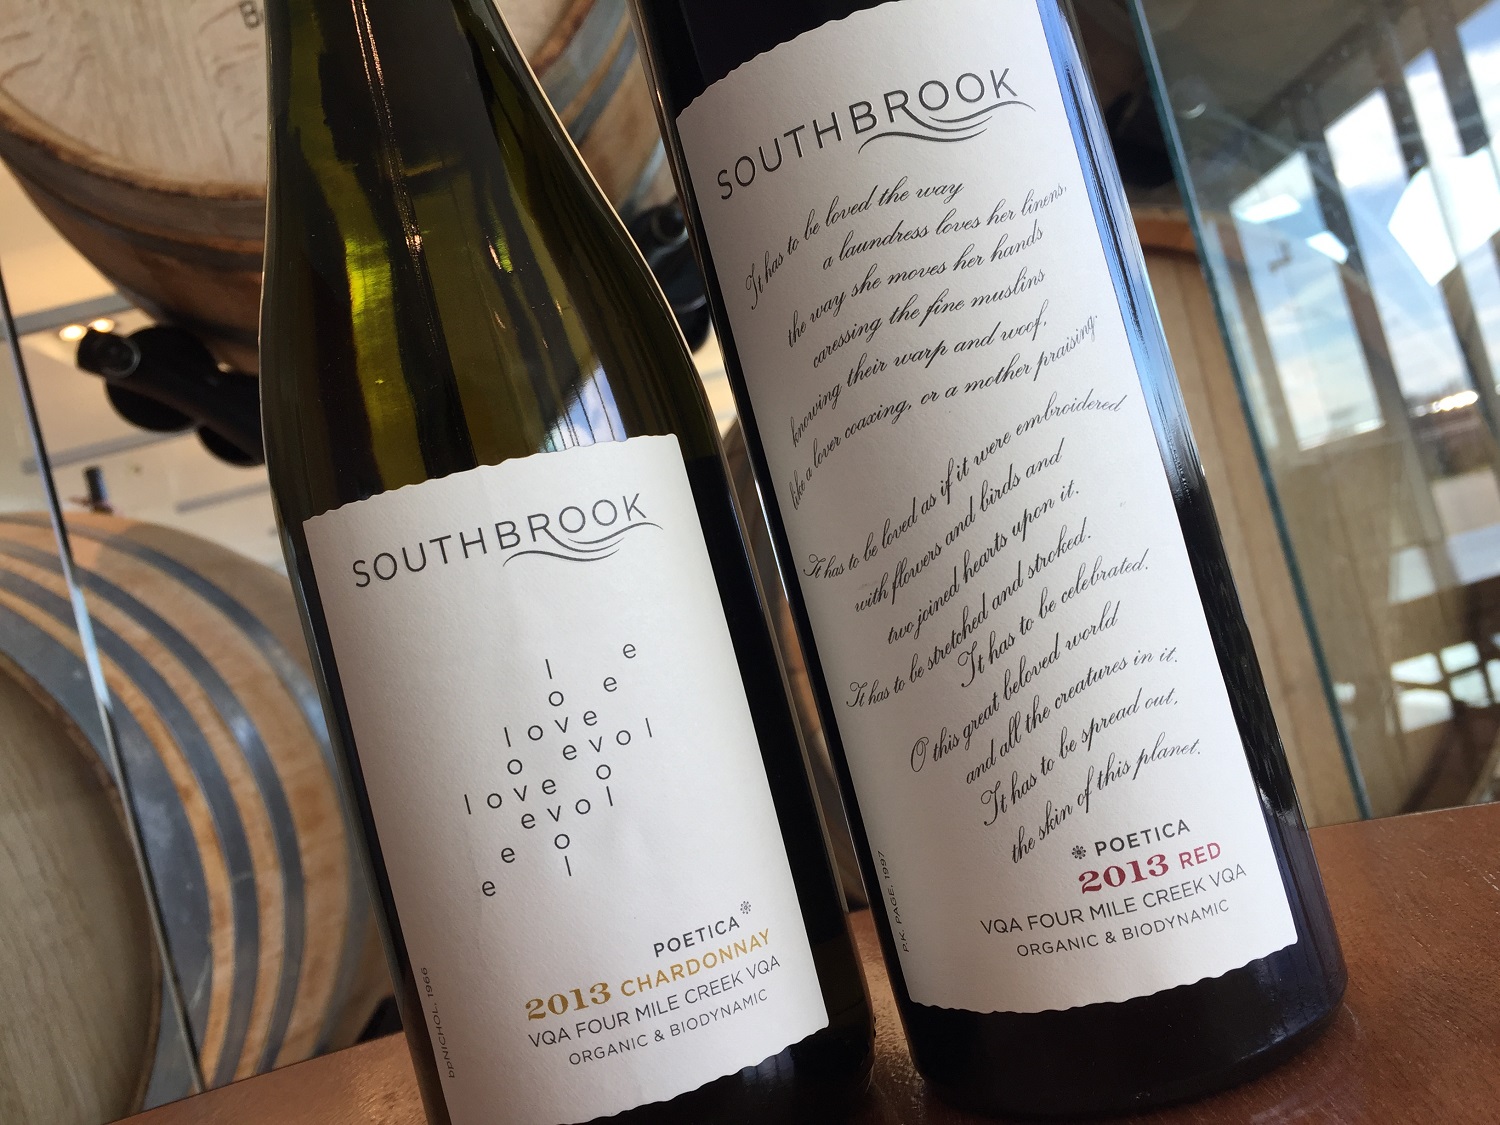 Bring joy this holiday season with gifts from Southbrook Vineyards